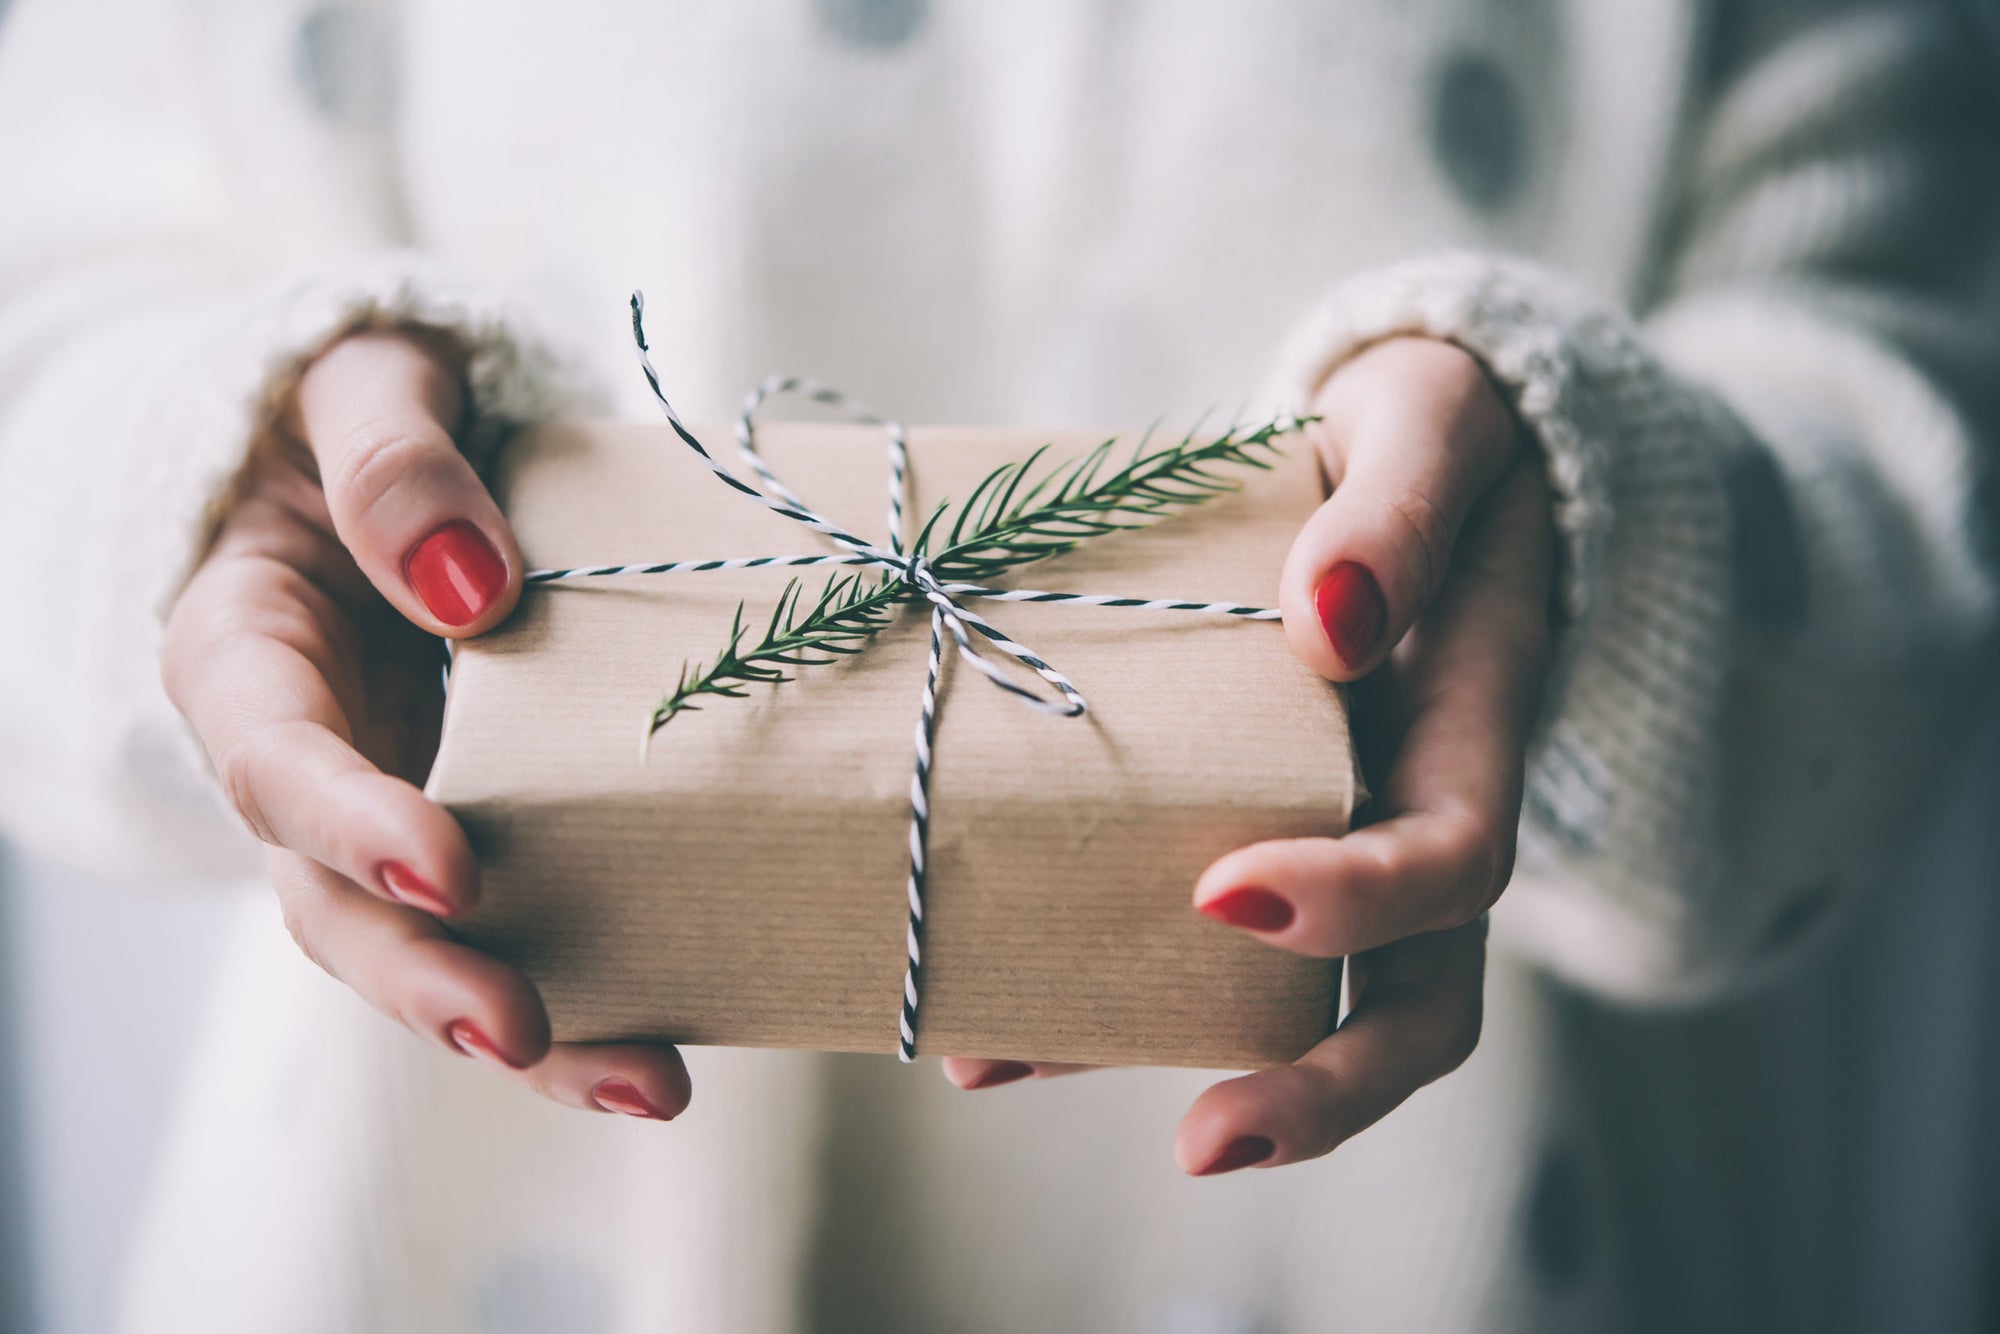 Your brain's response to giving - ‘Tis The Season of Giving